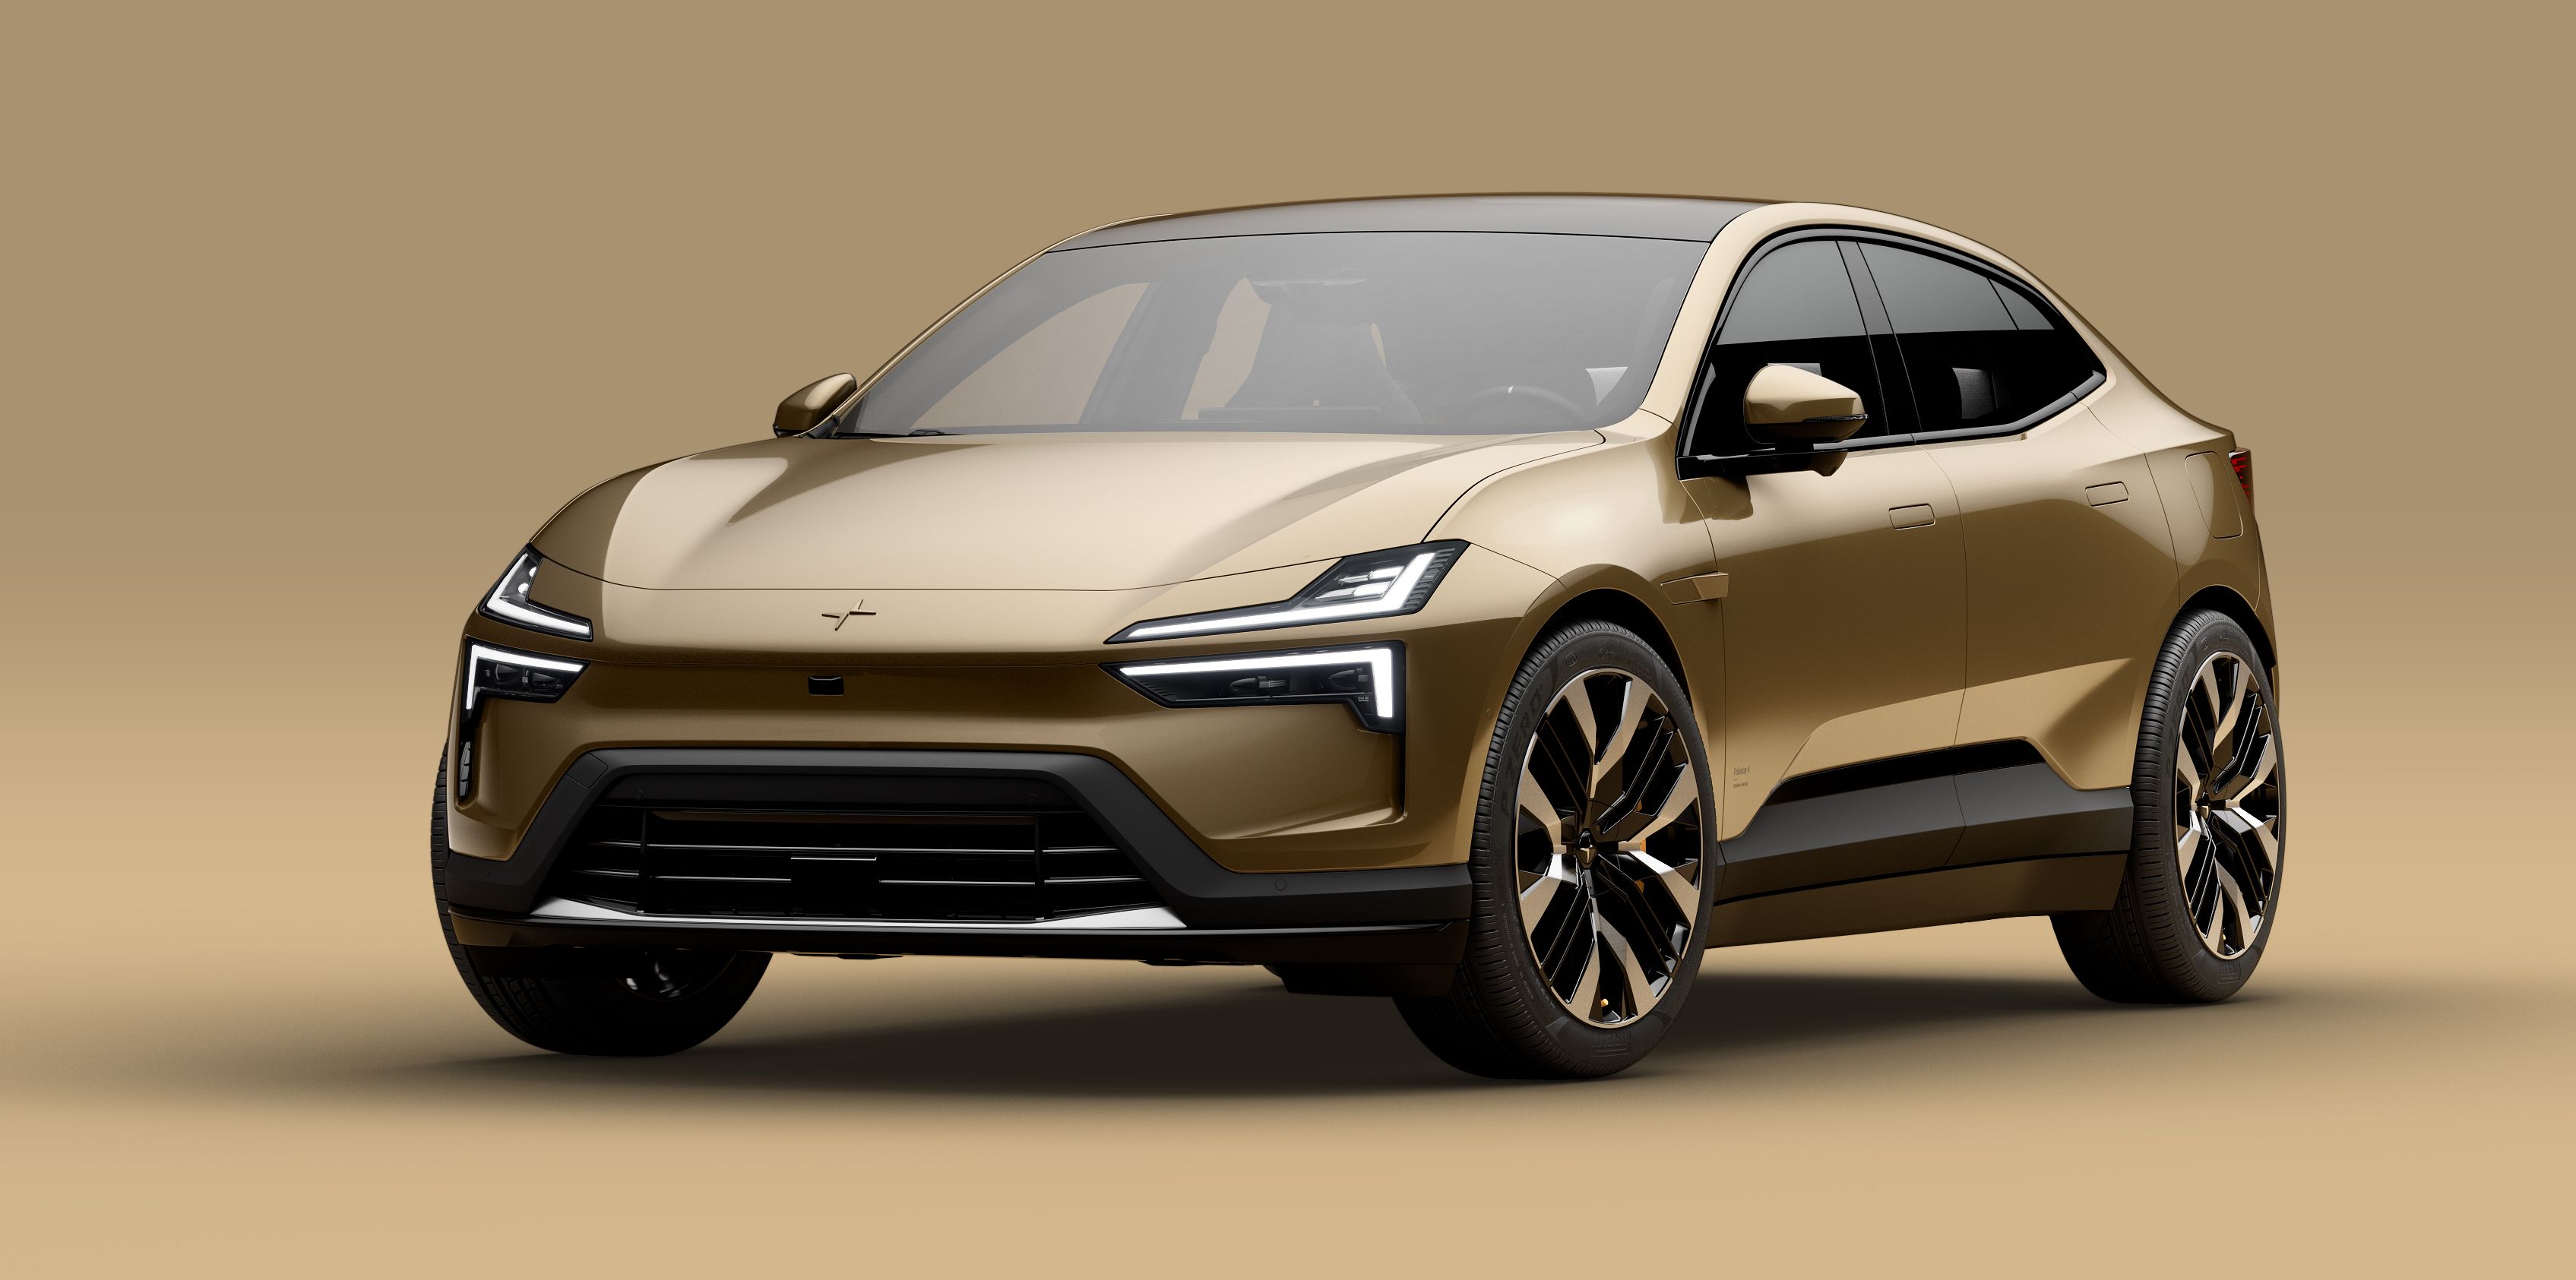 Future Electric Vehicles Coming 2023-2028